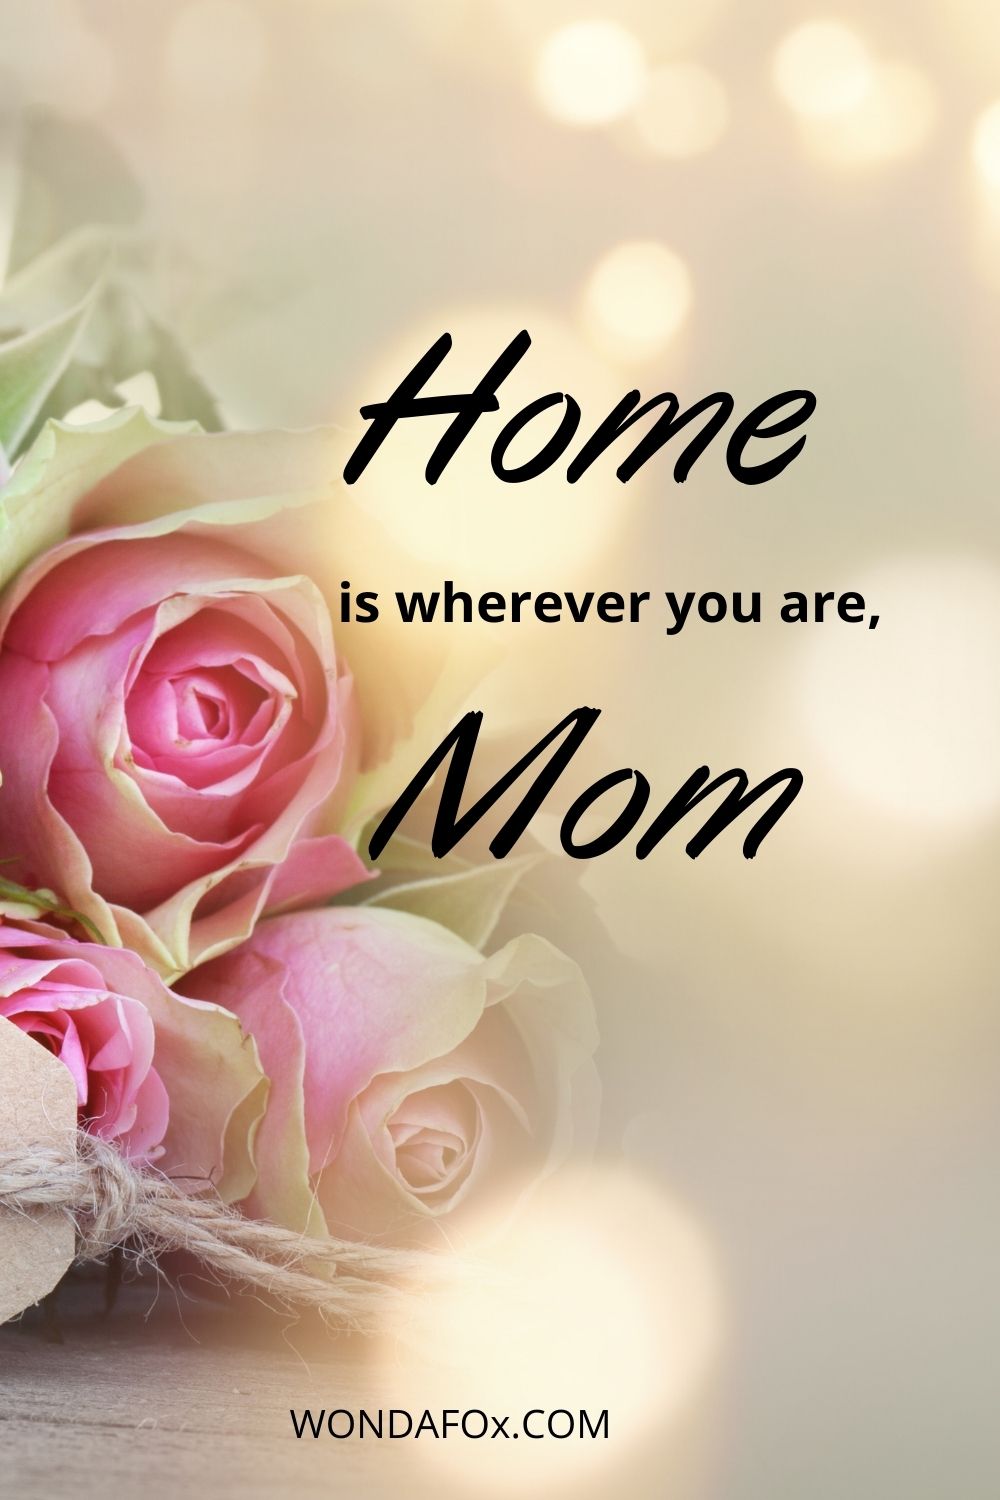 Home is wherever you are, Mom.